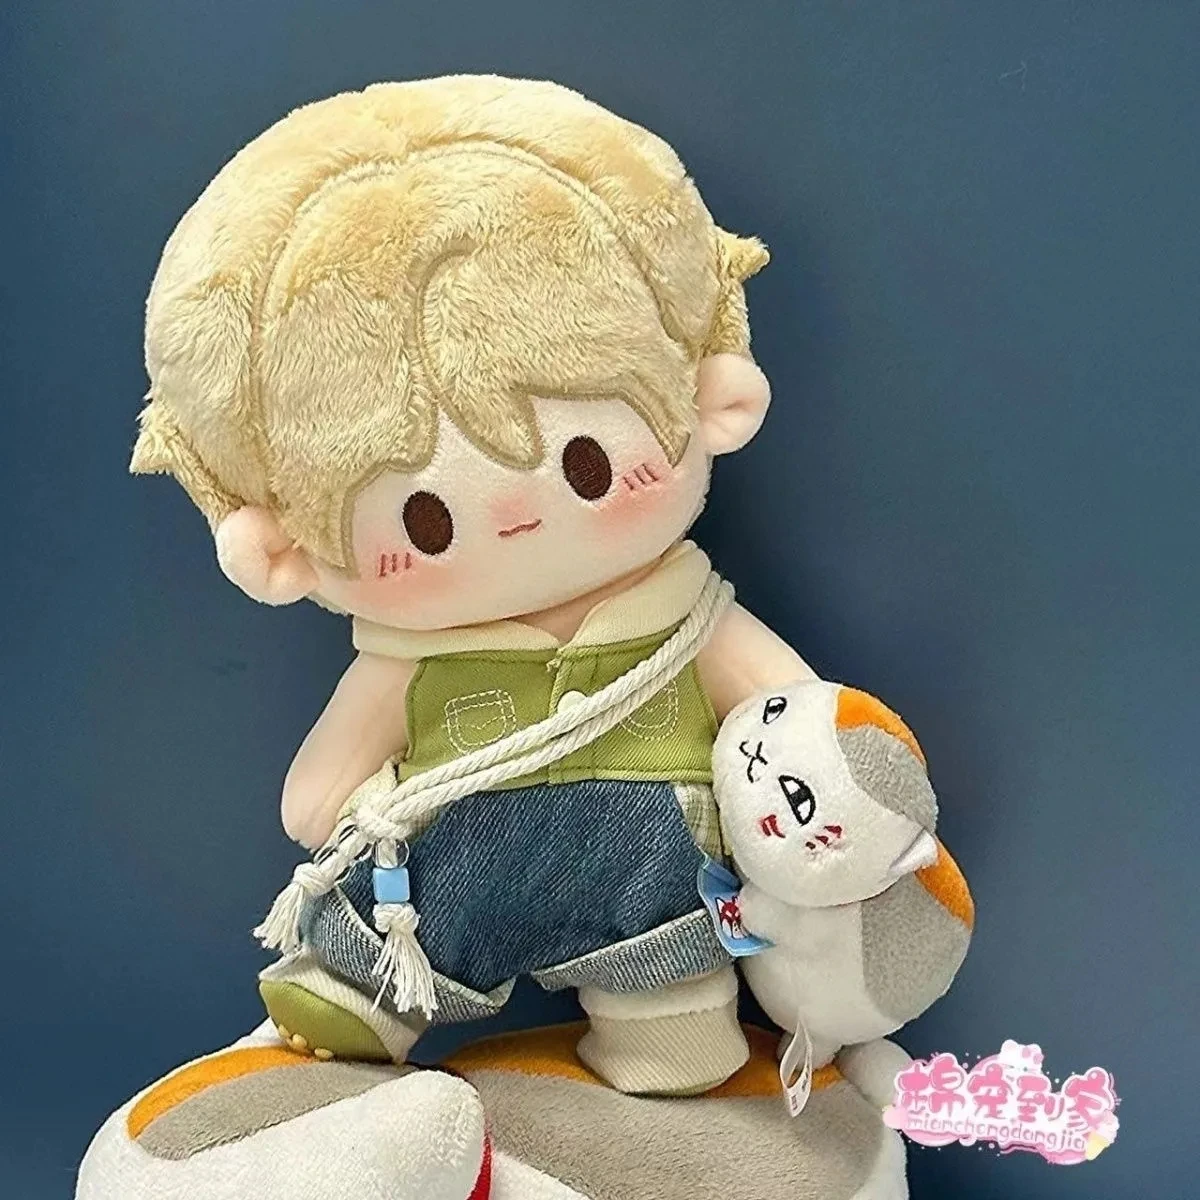 Anime Natsume's Book of Friends Natsume Takashi 20cm Plush Dolls Toy Nude Doll Plushie Cosplay a5837 Kids Gift r1627 1pcs anime pirate boy iron on patch embroidered cool clothes patches for kids friends badge stickers garment appliques